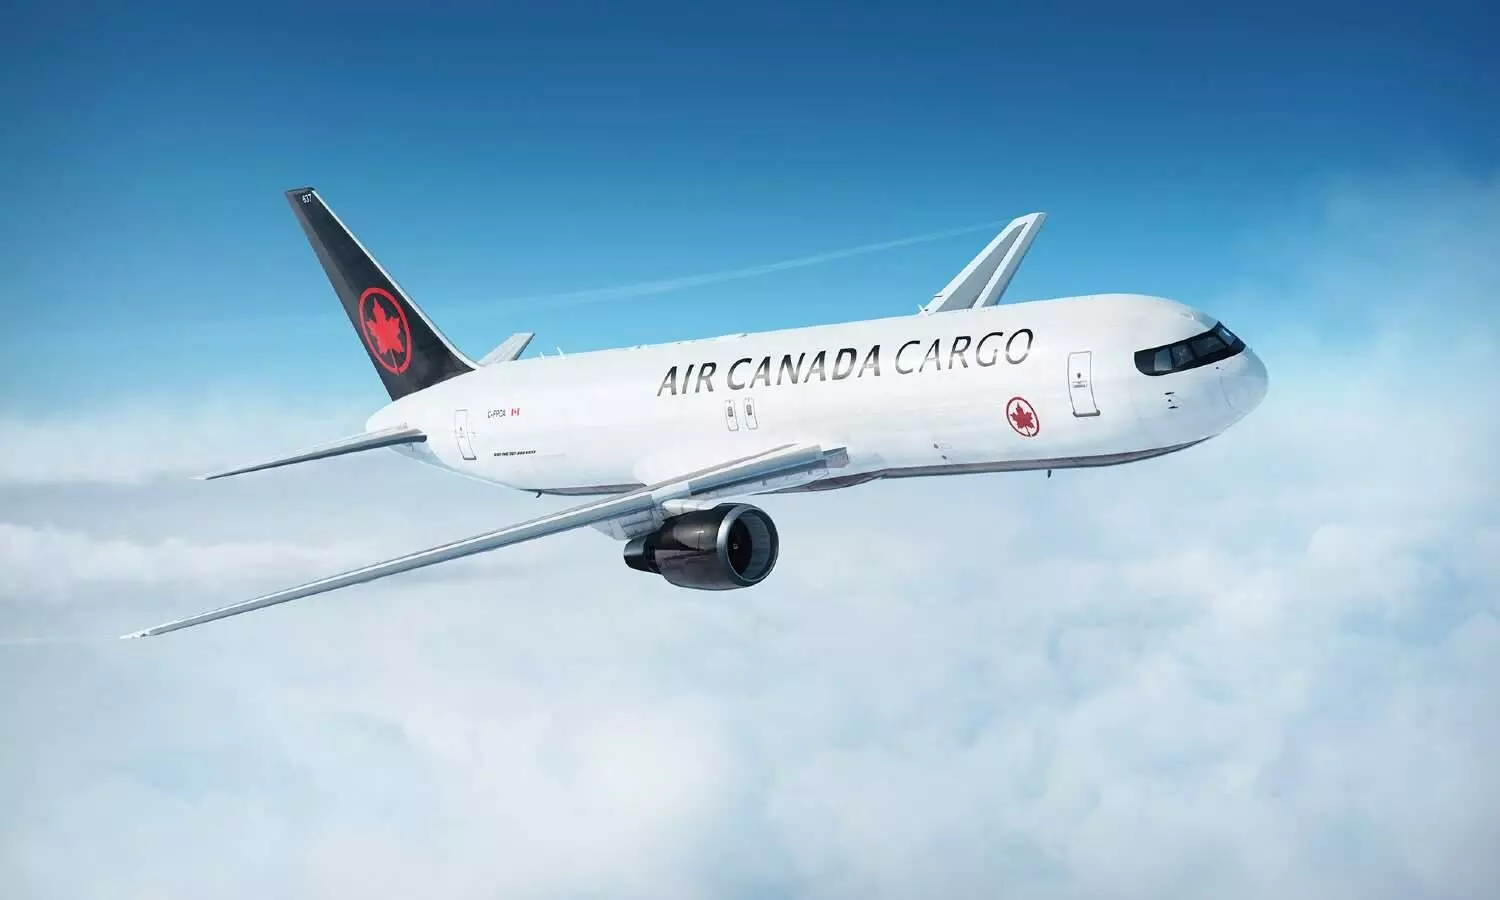 These new flights will complement Air Canada Cargos existing cargo service to Latin American destinations